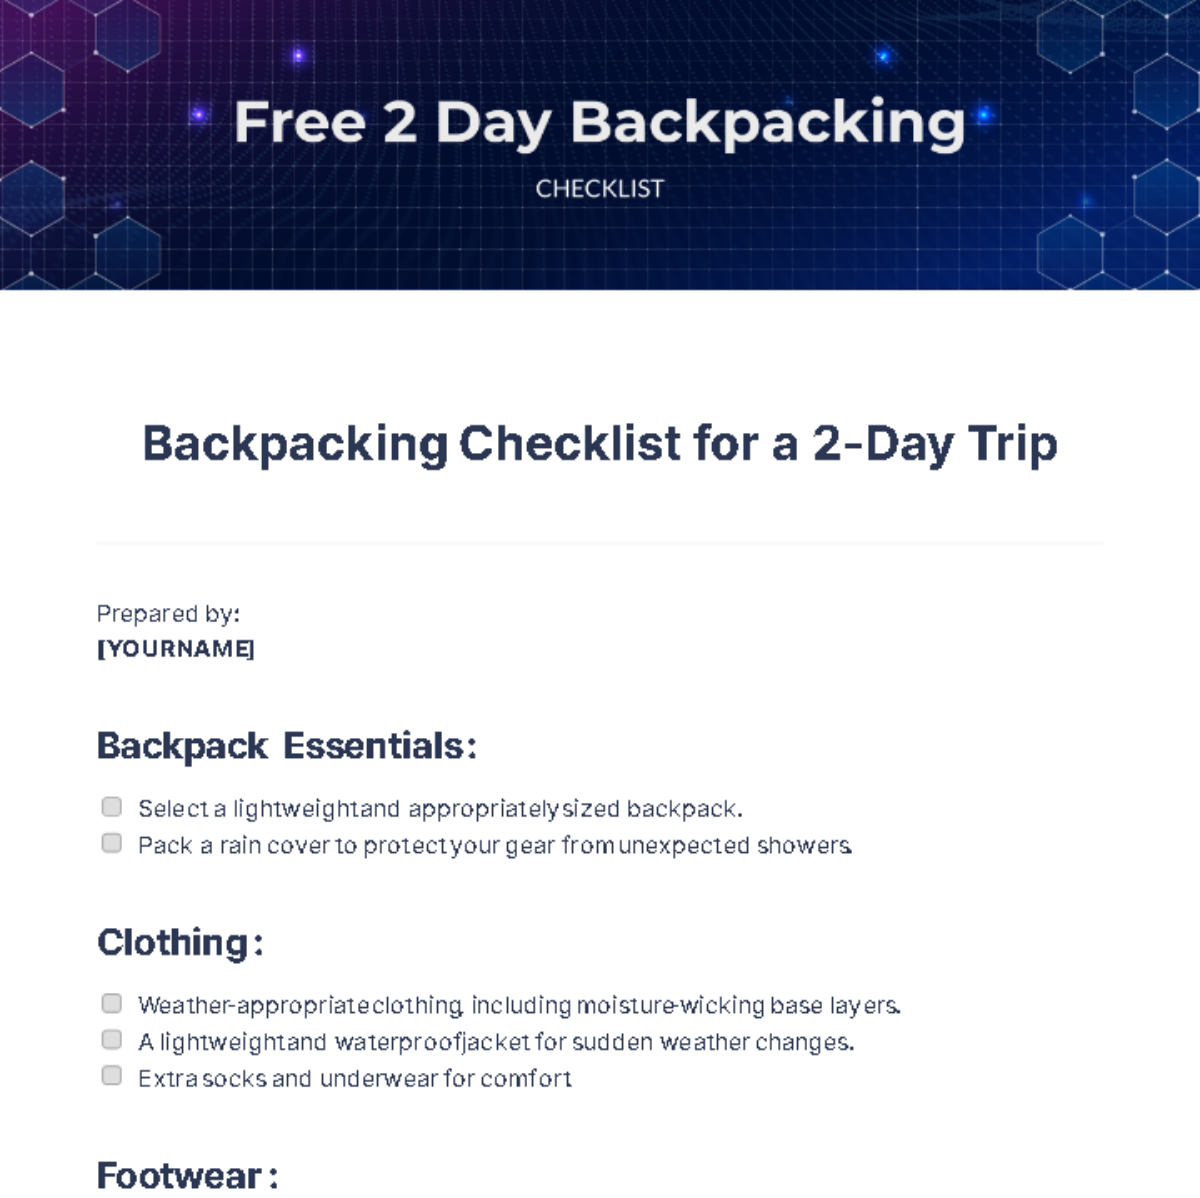 Free 2 Day Backpacking Checklist Template